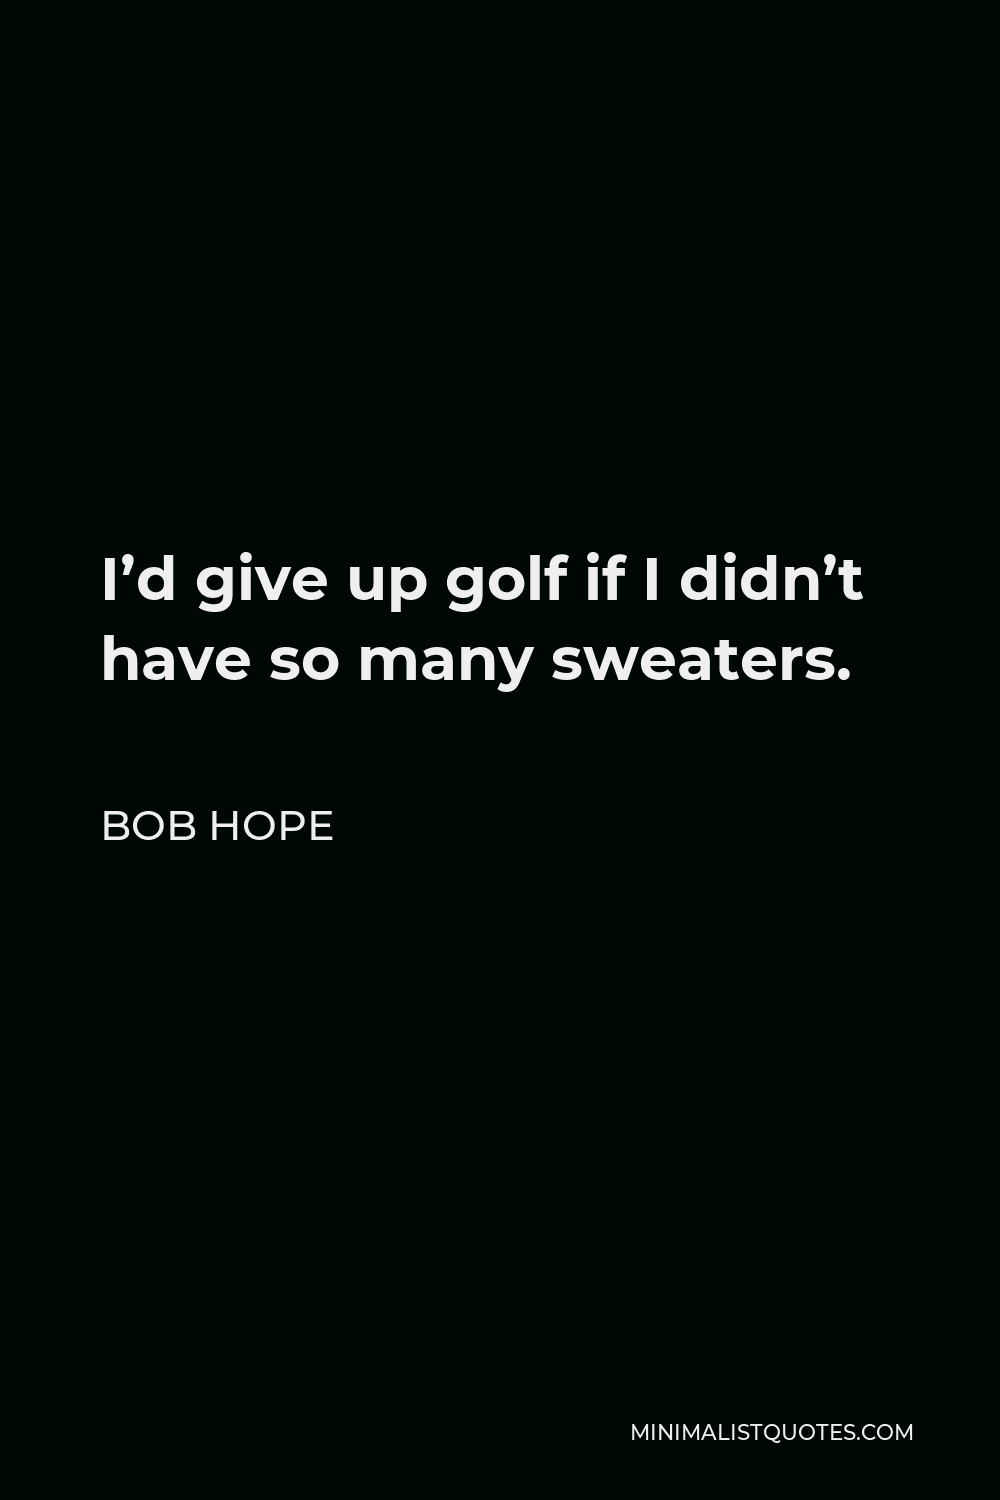 Bob Hope Quote - I’d give up golf if I didn’t have so many sweaters.